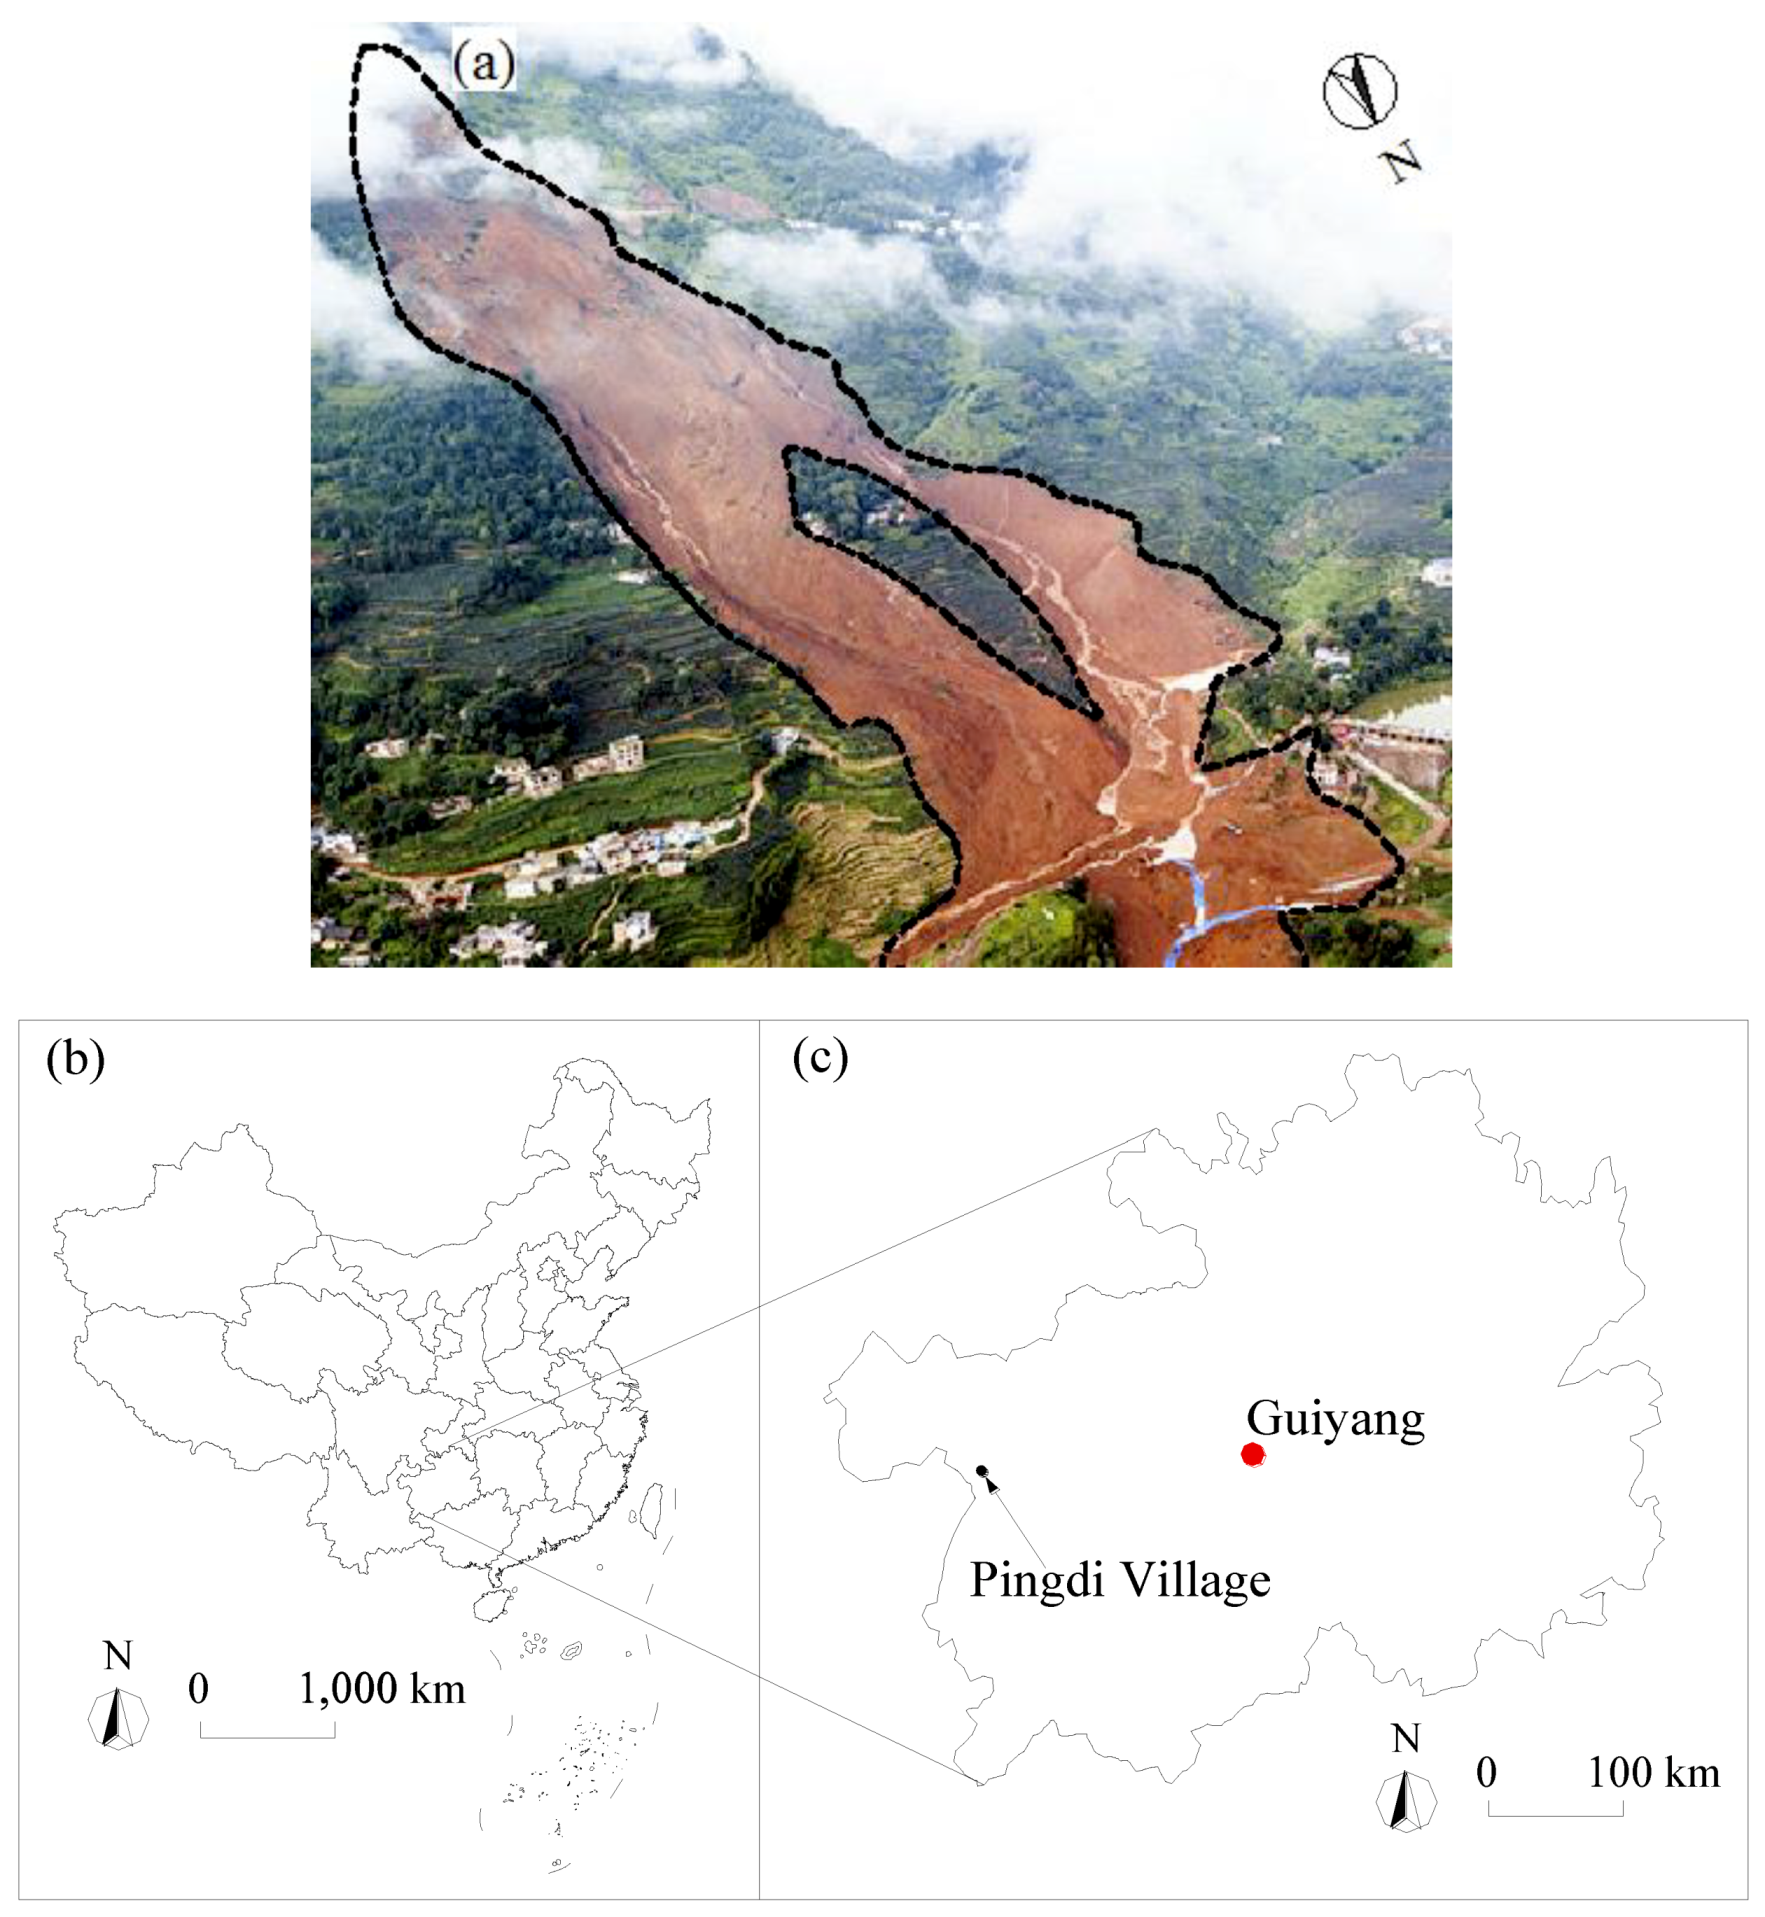 Geosciences | Free Full-Text | A Brief Report of Pingdi Landslide (23 July  2019) in Guizhou Province, China